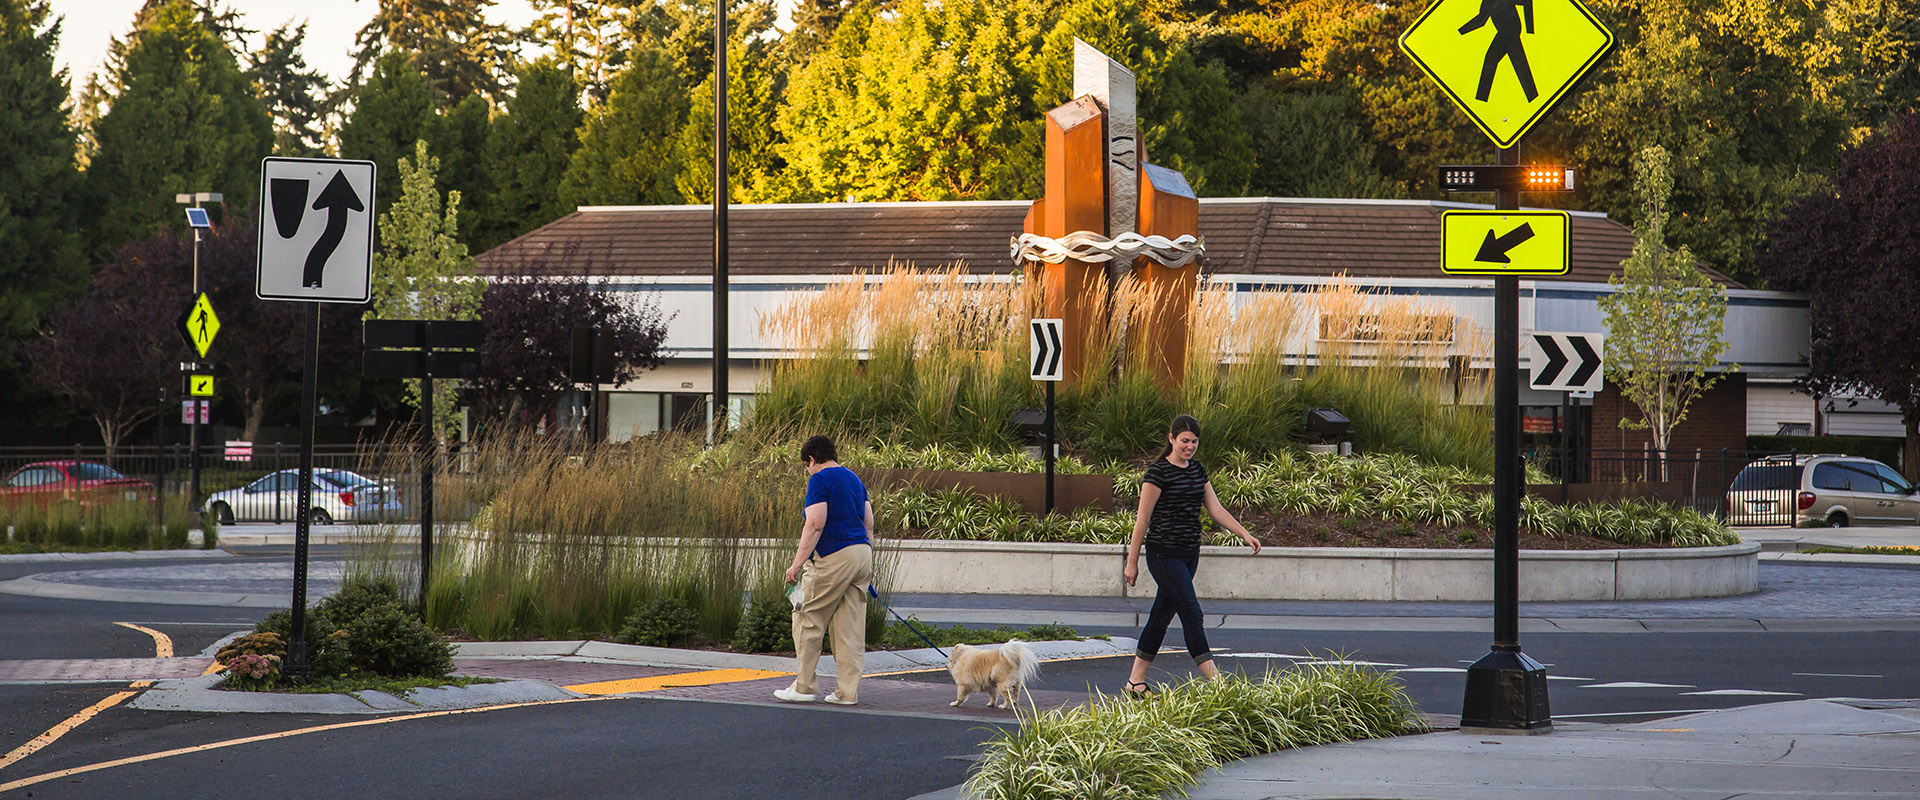 Woman crossing the roundabout using a solar RRFB system in Edmonds, Washington